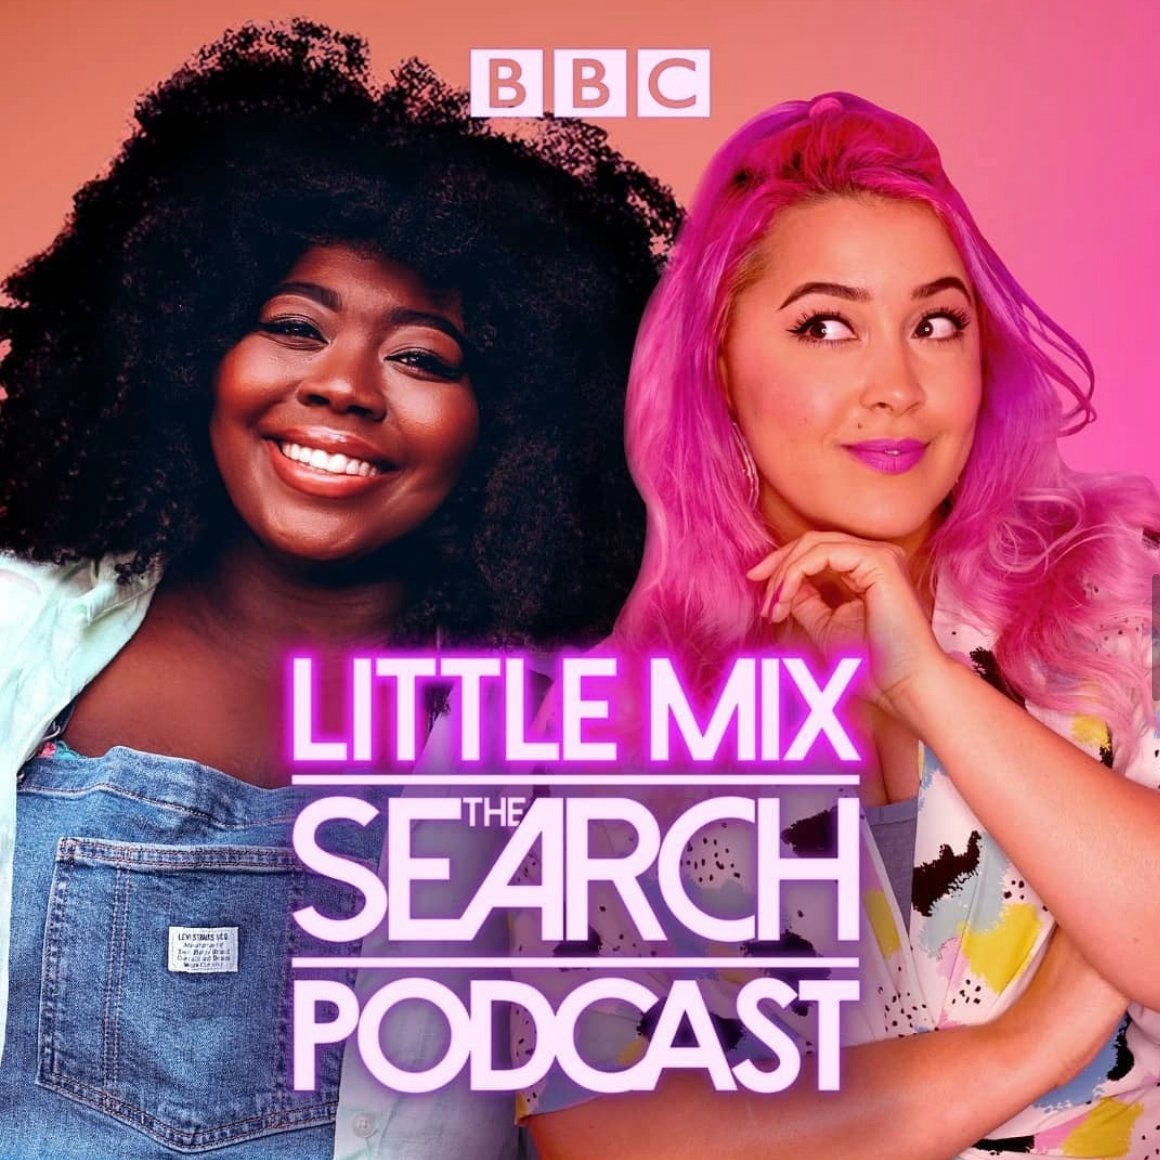  Megan Jayne Crabbe (Bodyposipanda) and Stephanie Yeboah promo image for BBC’s Little Mix: The Search Podcast. 